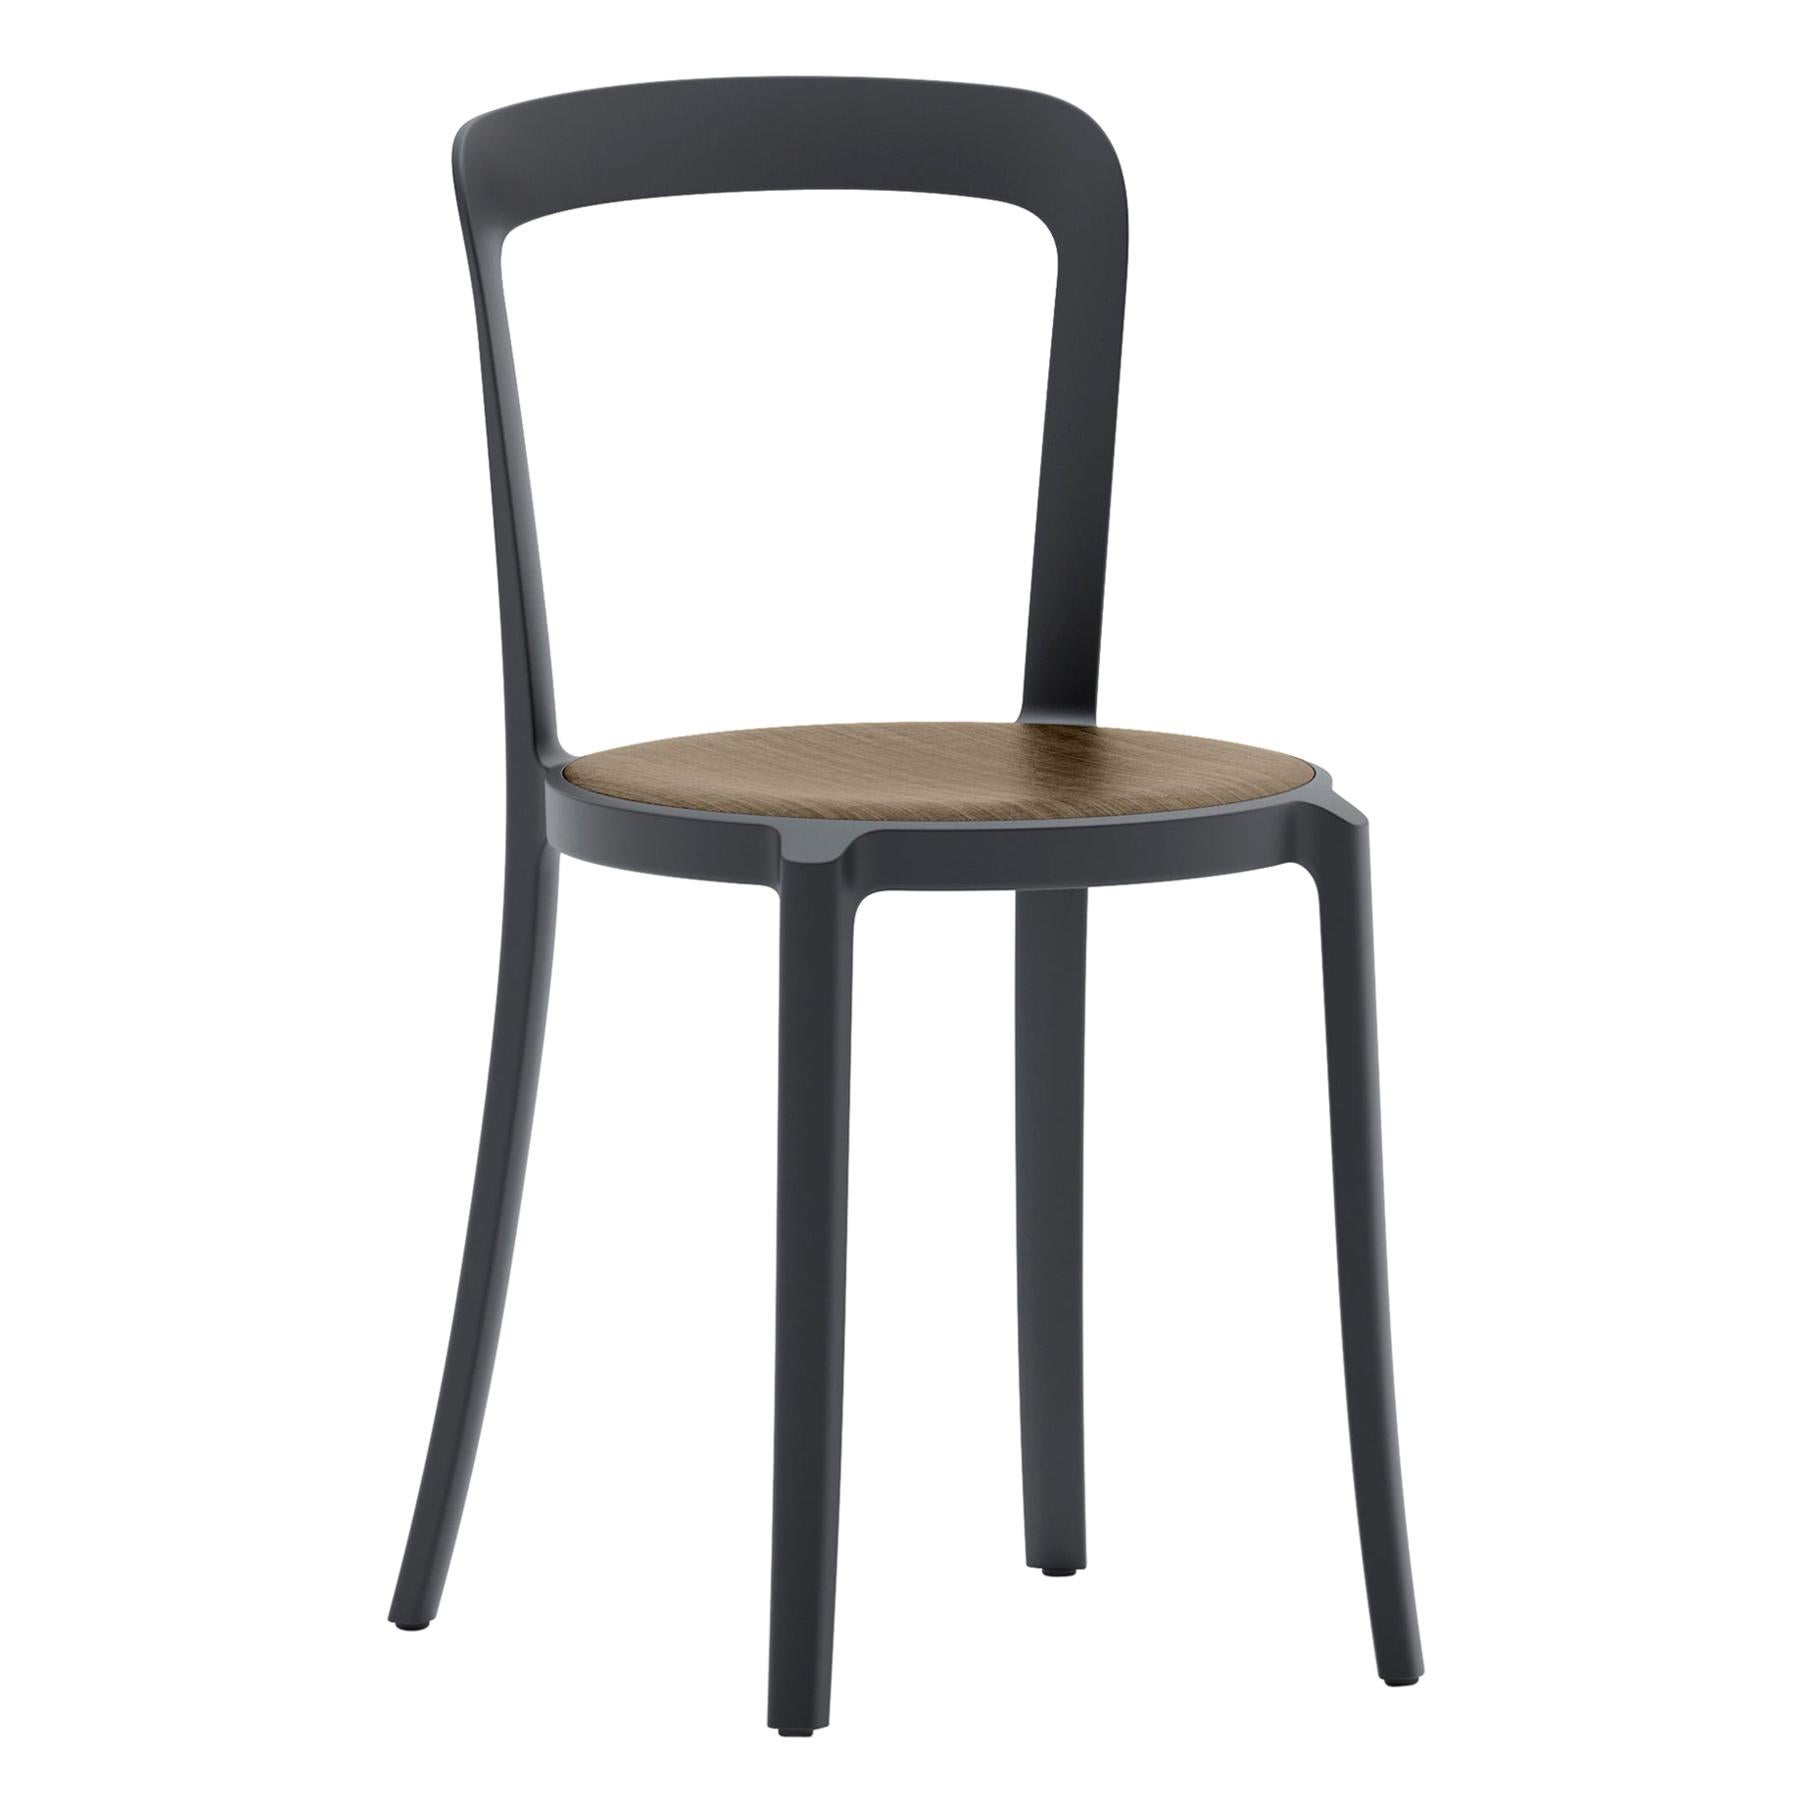 Emeco On & On Stacking Chair in Black with Walnut seat by Barber & Osgerby For Sale